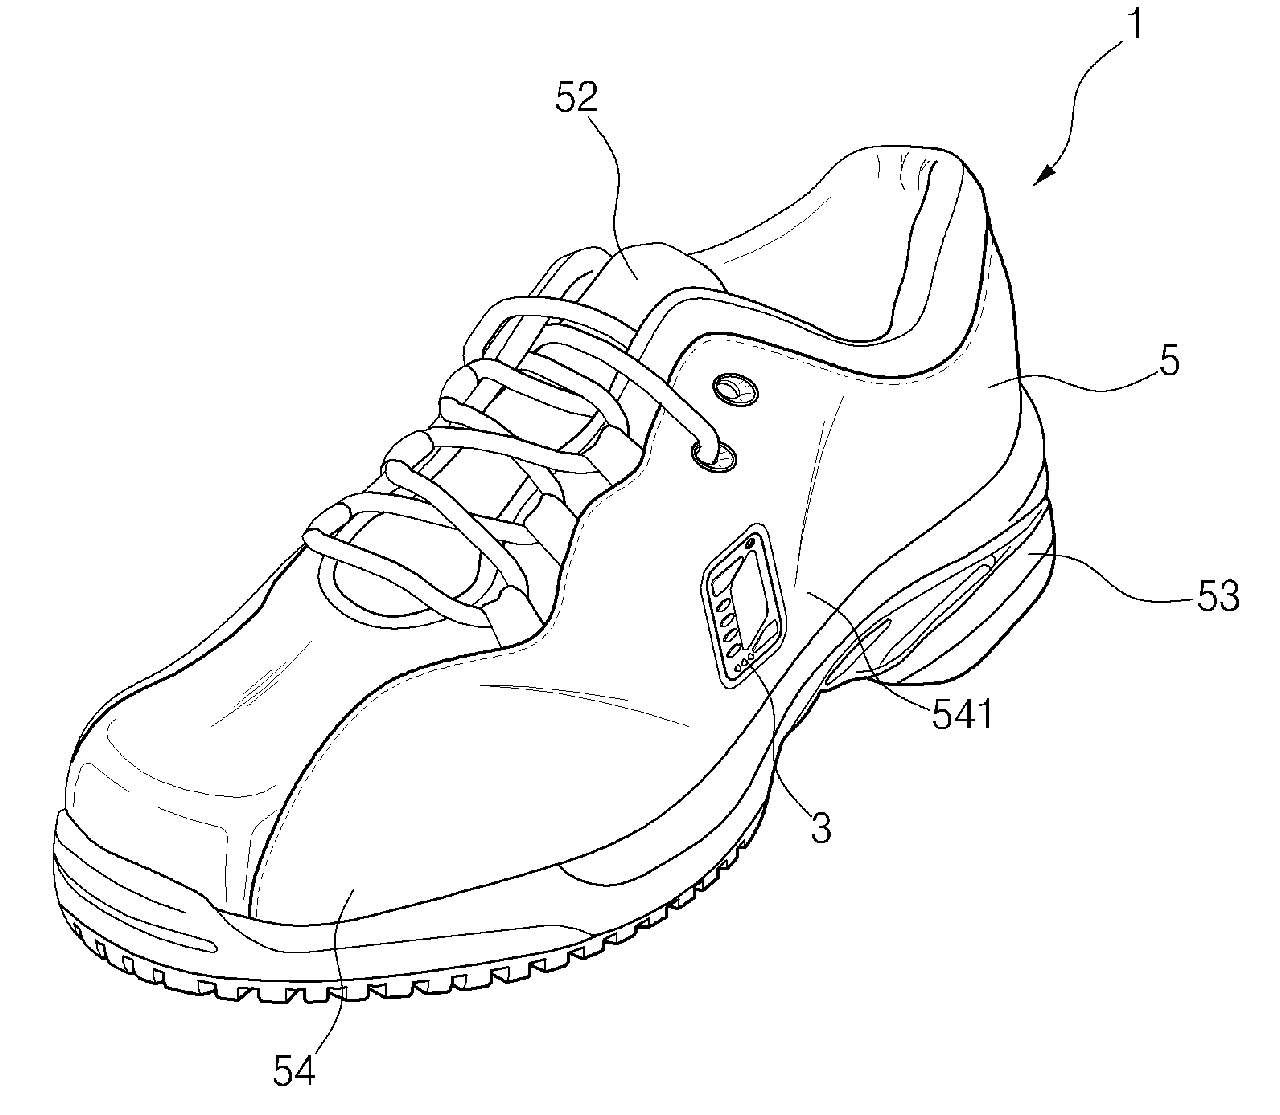 Artificial Intelligence Shoe Mounting a Controller and Method for Measuring Quantity of Motion